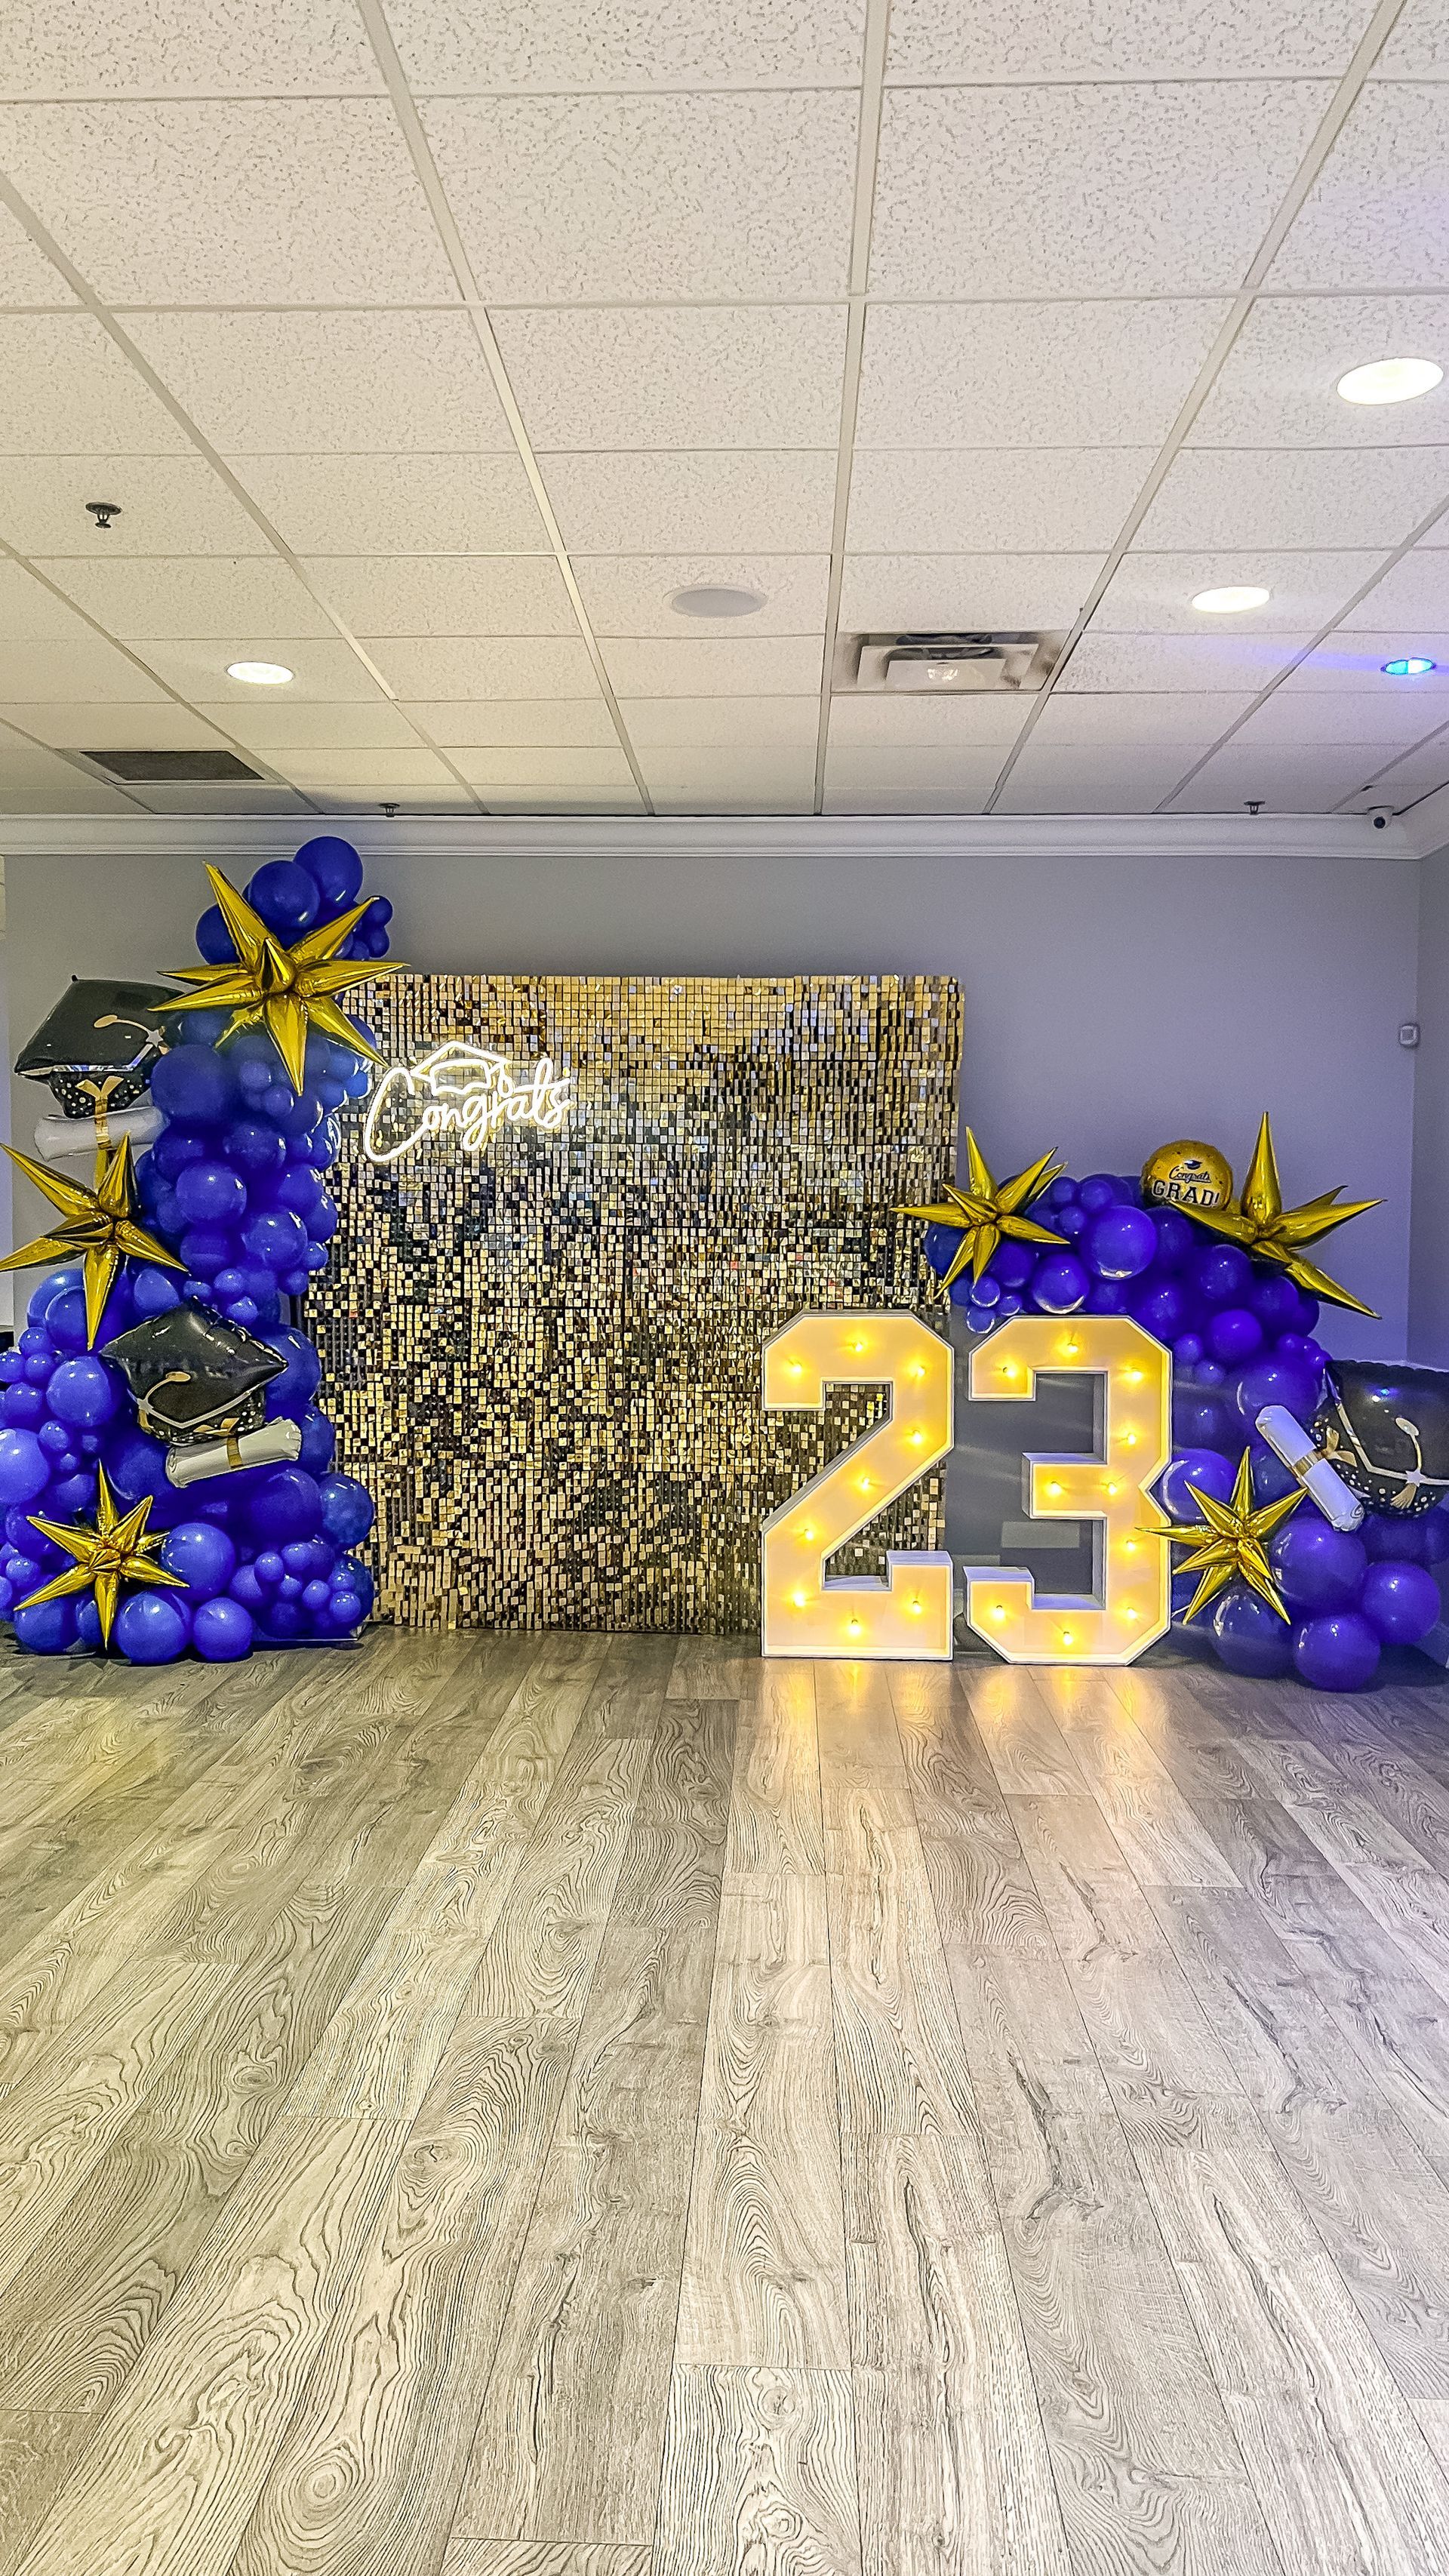 A room filled with balloons and a sign that says `` 23 ''.